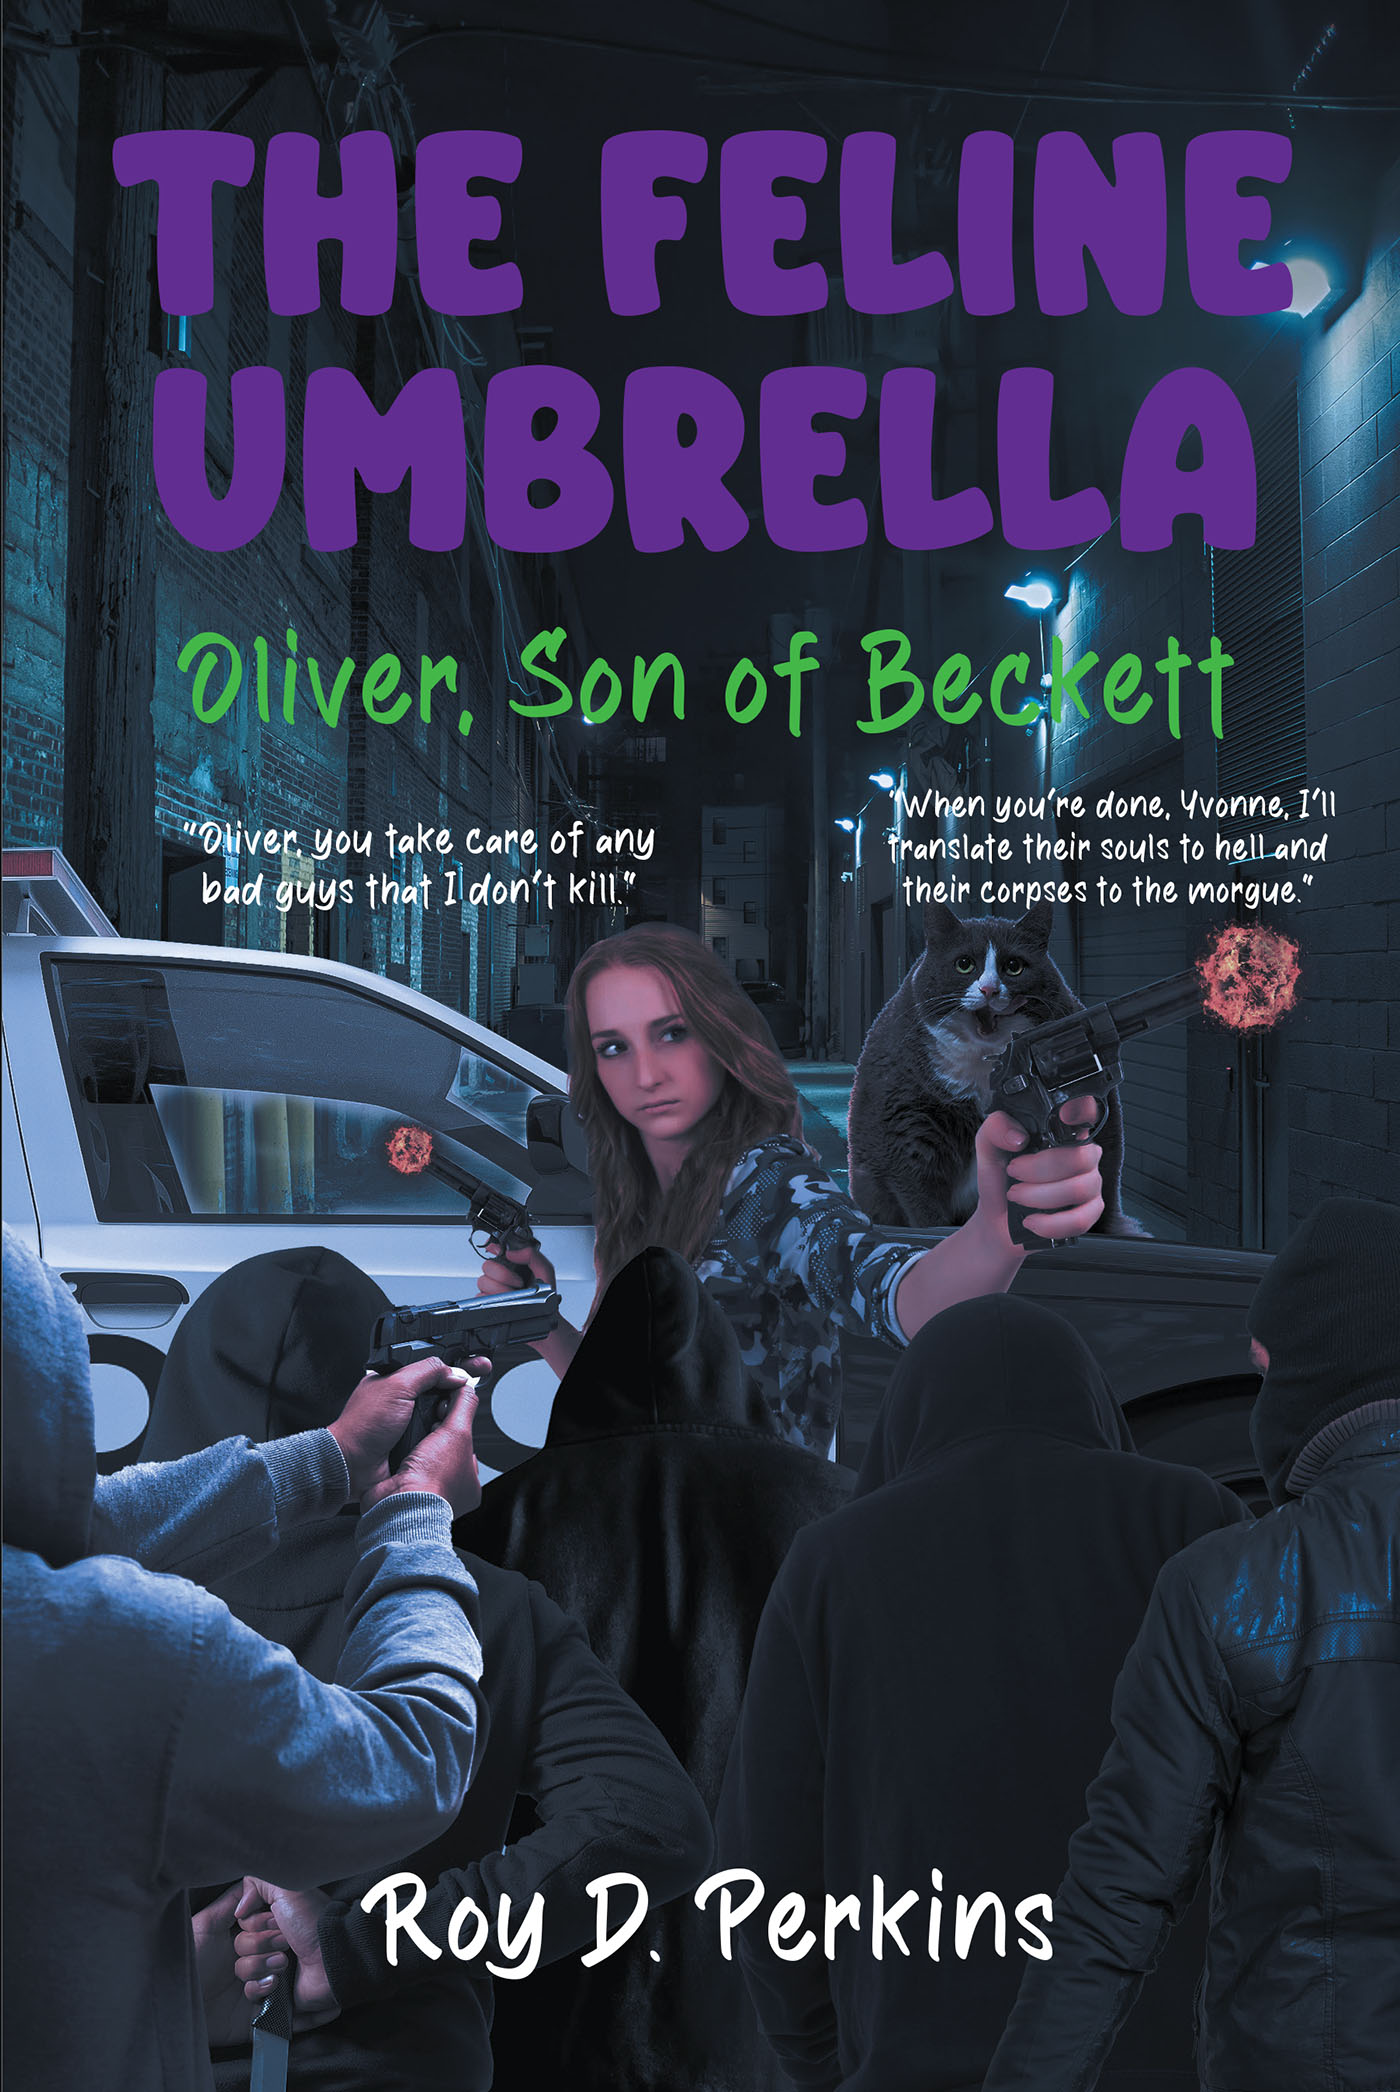 Author Roy Perkins’s New Book, "The Feline Umbrella: Oliver, Son of Beckett," Follows the Adventures of a Murder Witness and Her Feline Guardian Angel